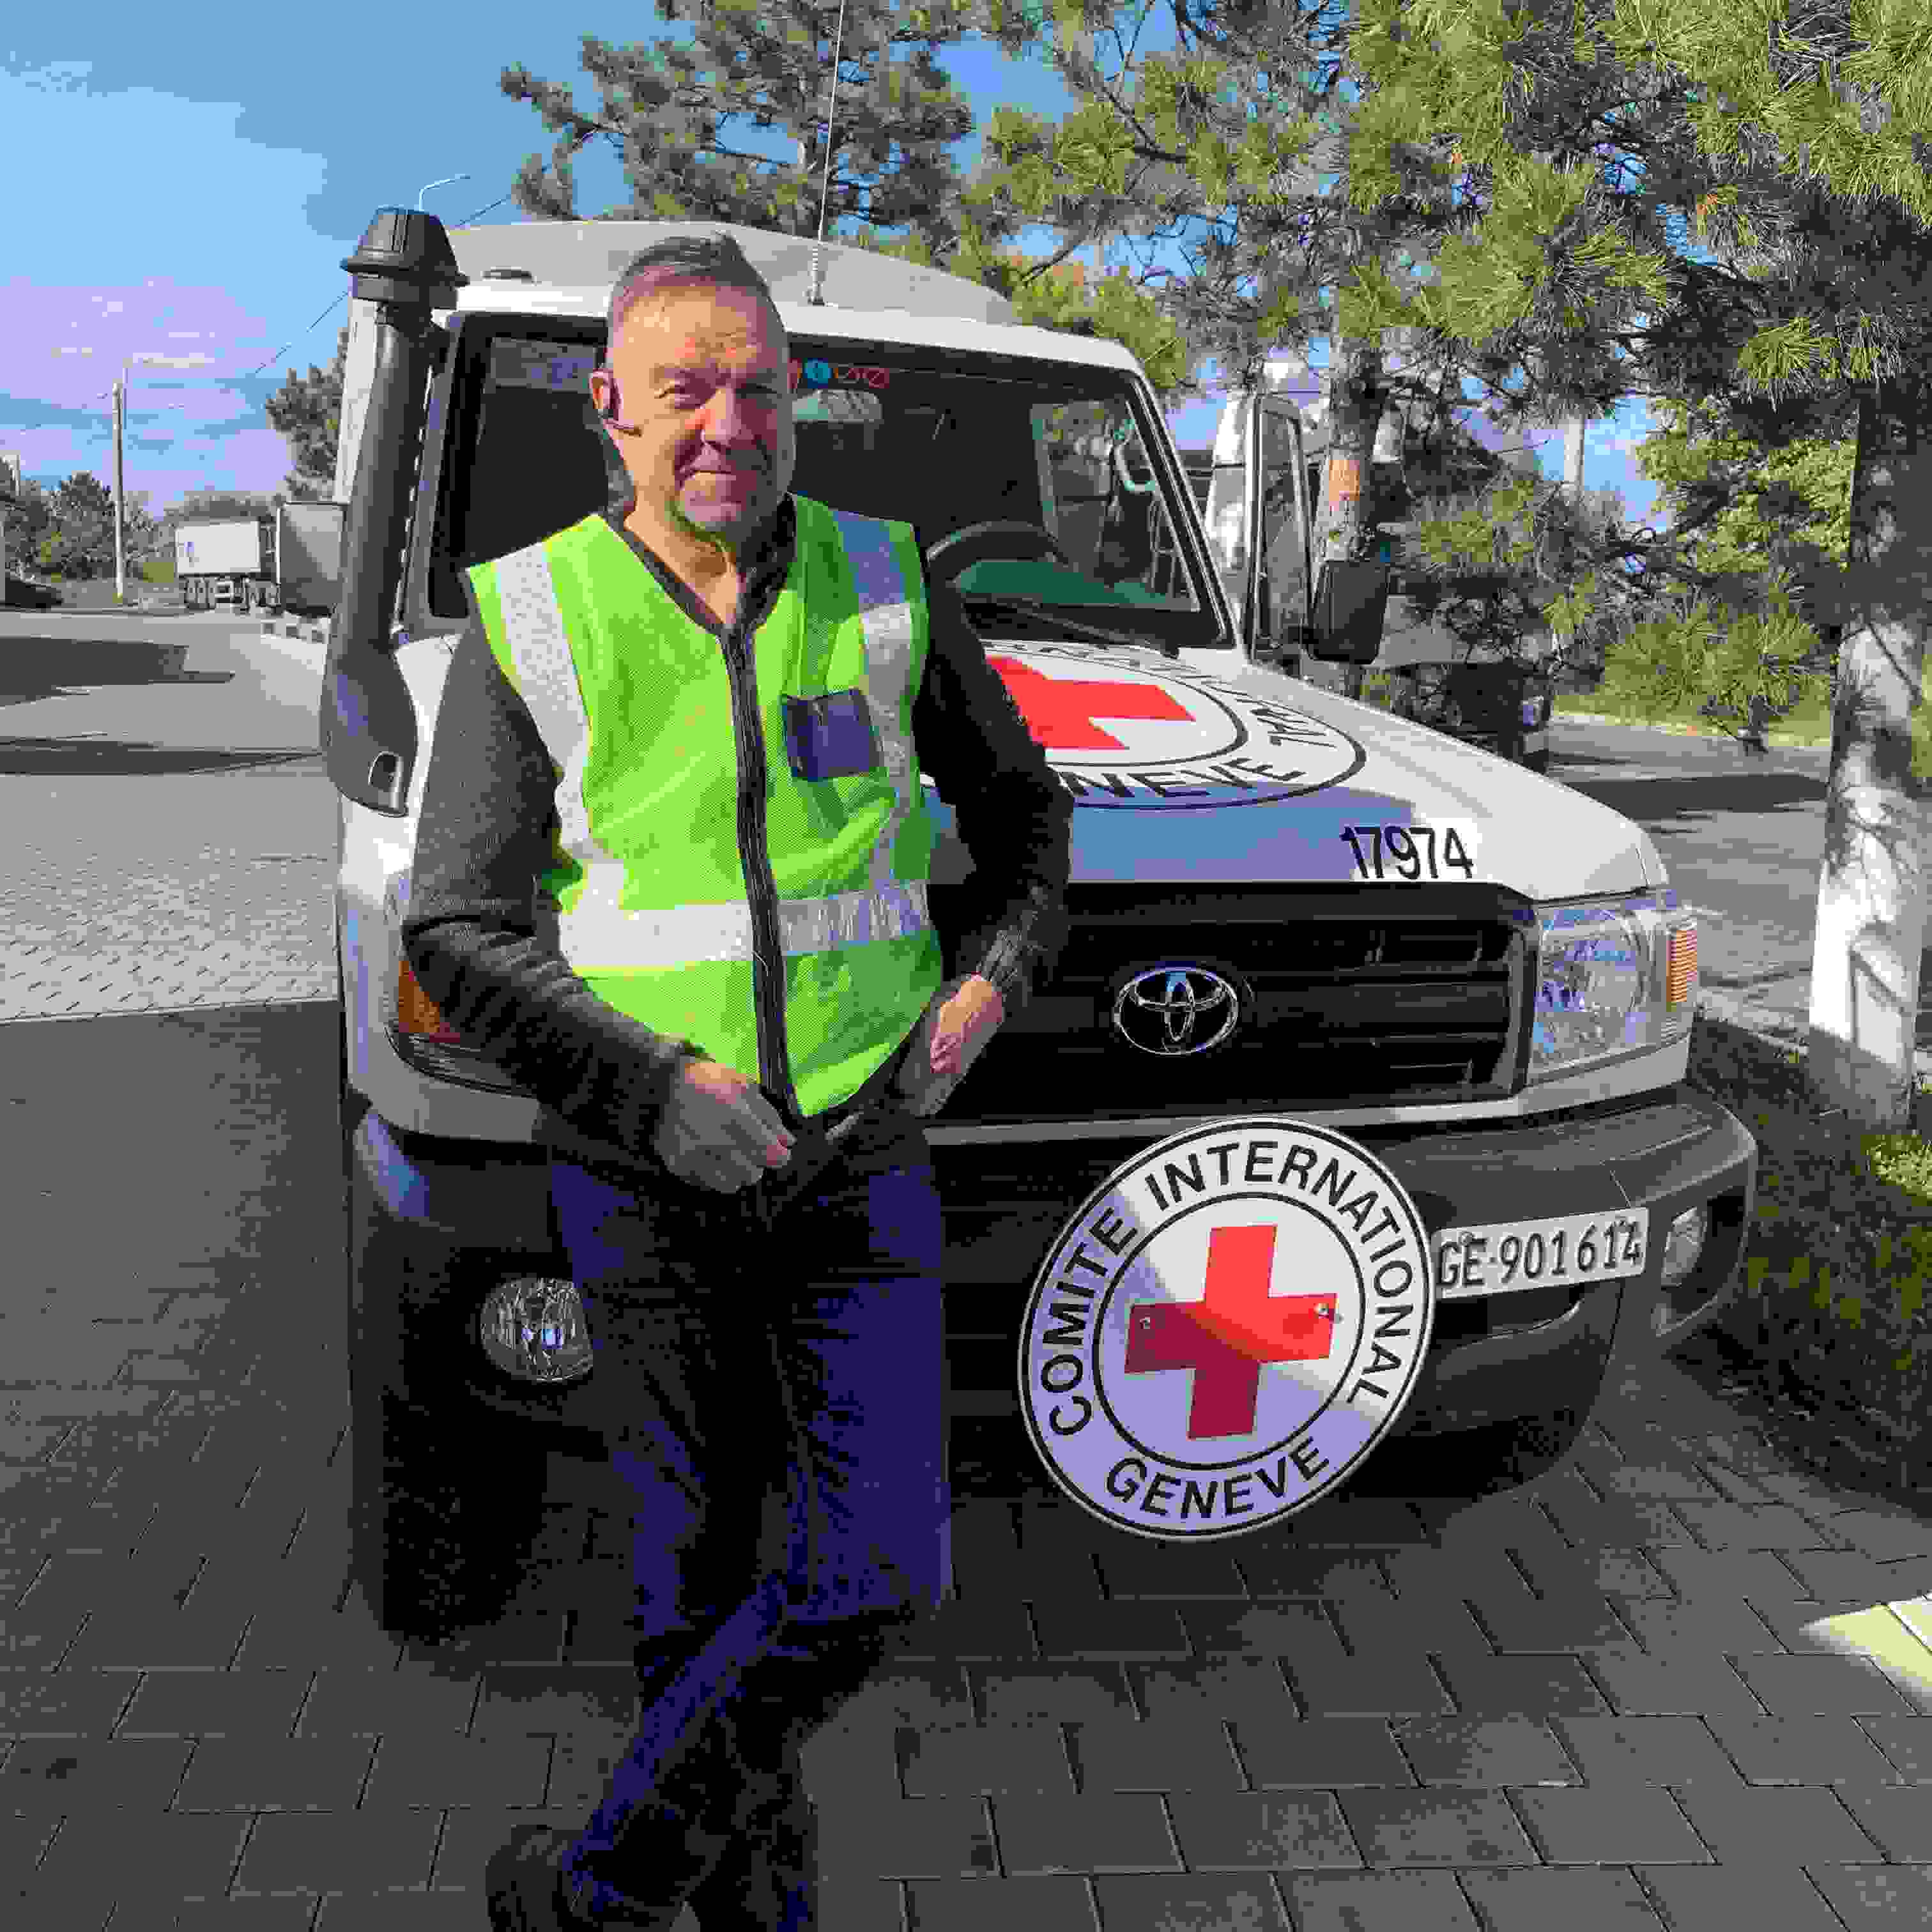 Aid worker Keijo Eklöf is smiling and standing in front of the International Committee of the Red Cross car.